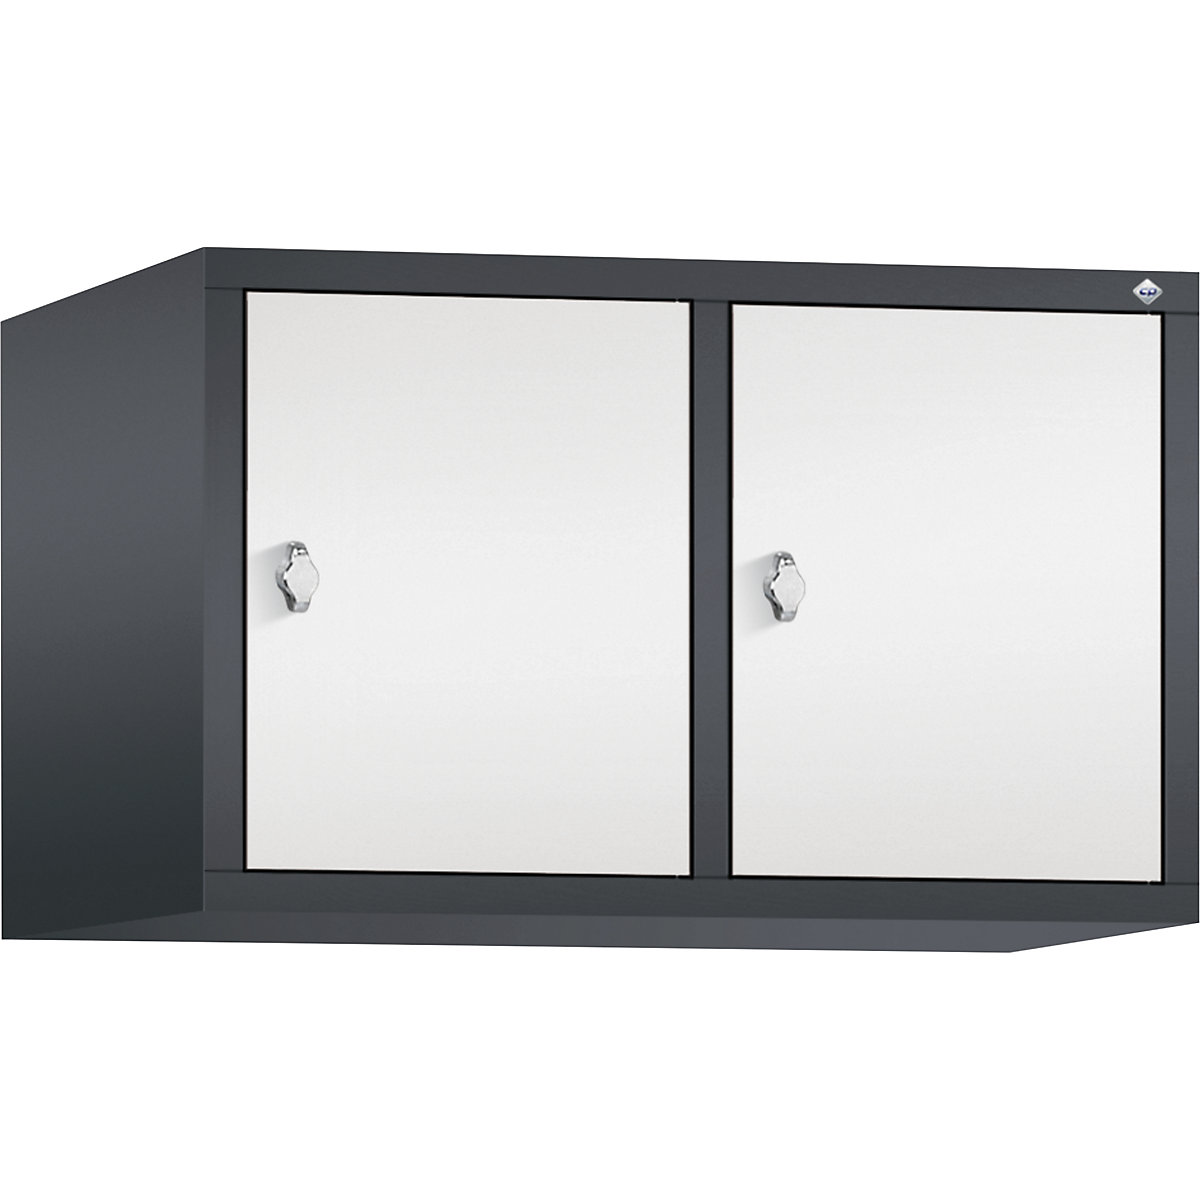 CLASSIC add-on cupboard – C+P, 2 compartments, compartment width 400 mm, black grey / traffic white-14